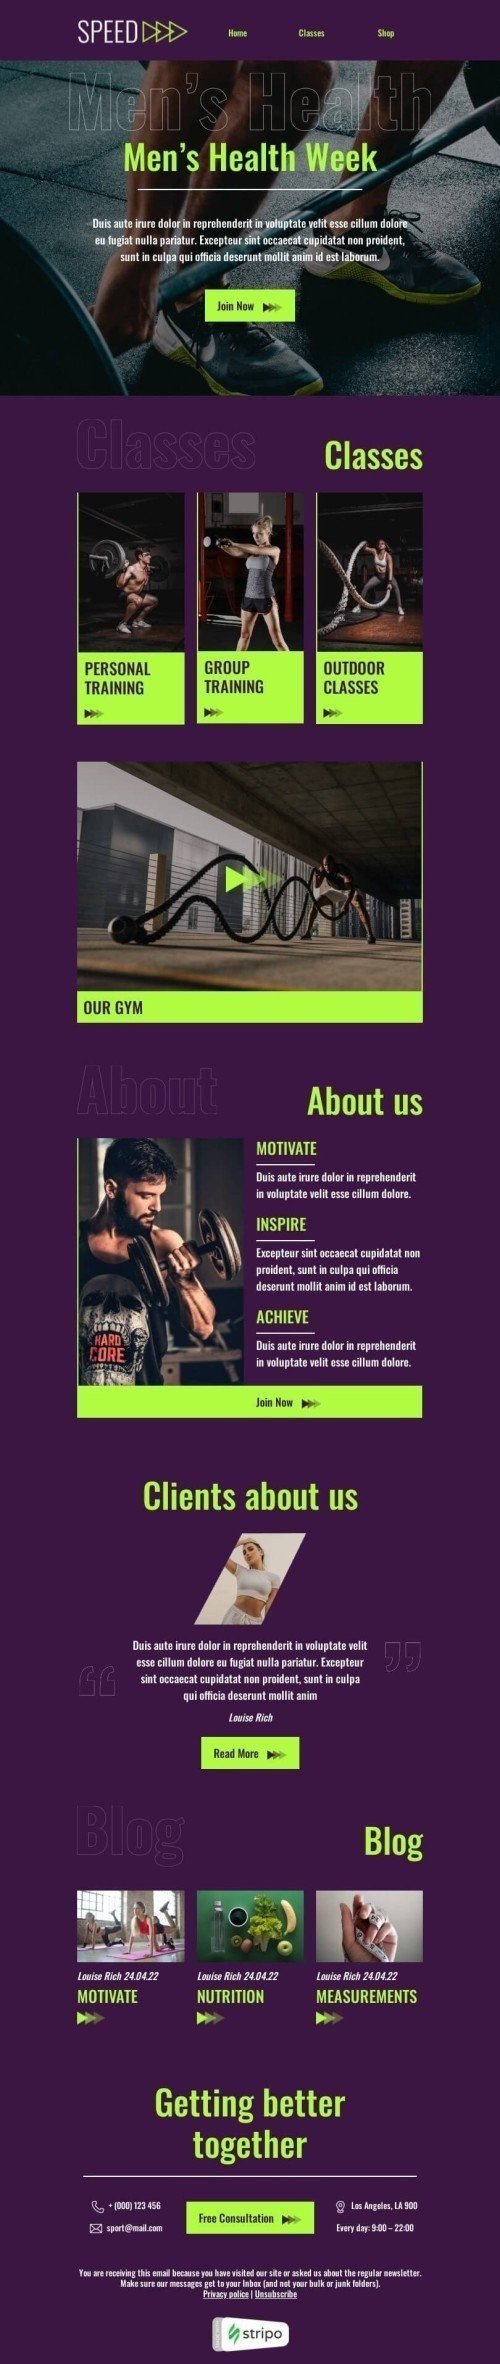 Men’s Health Week Email Template "Outdoor classes" for Sports industry mobile view